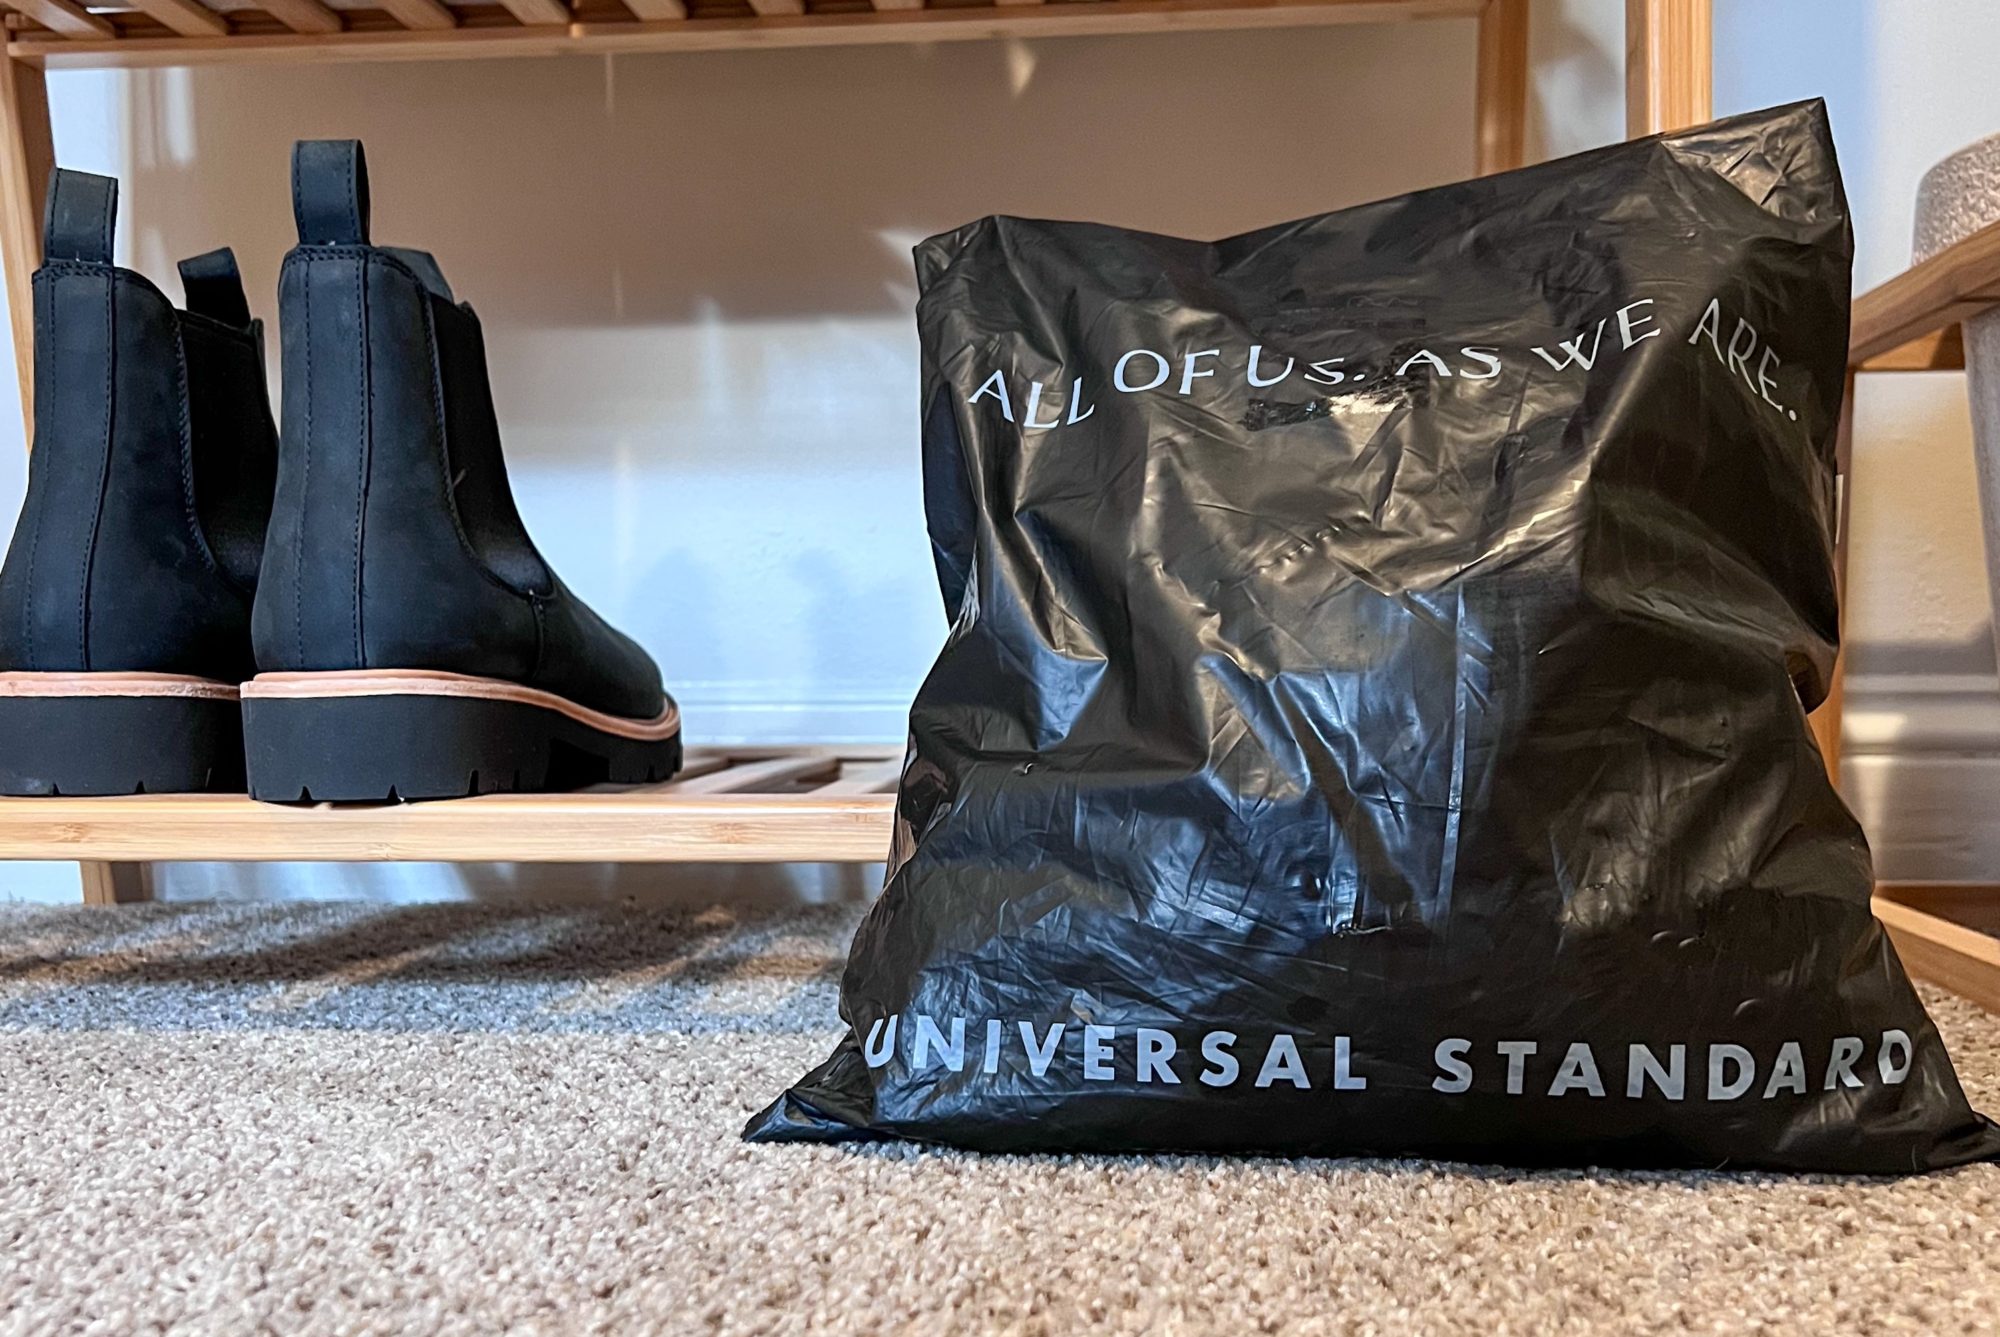 A mailer bag from Universal Standard next to a pair of boots